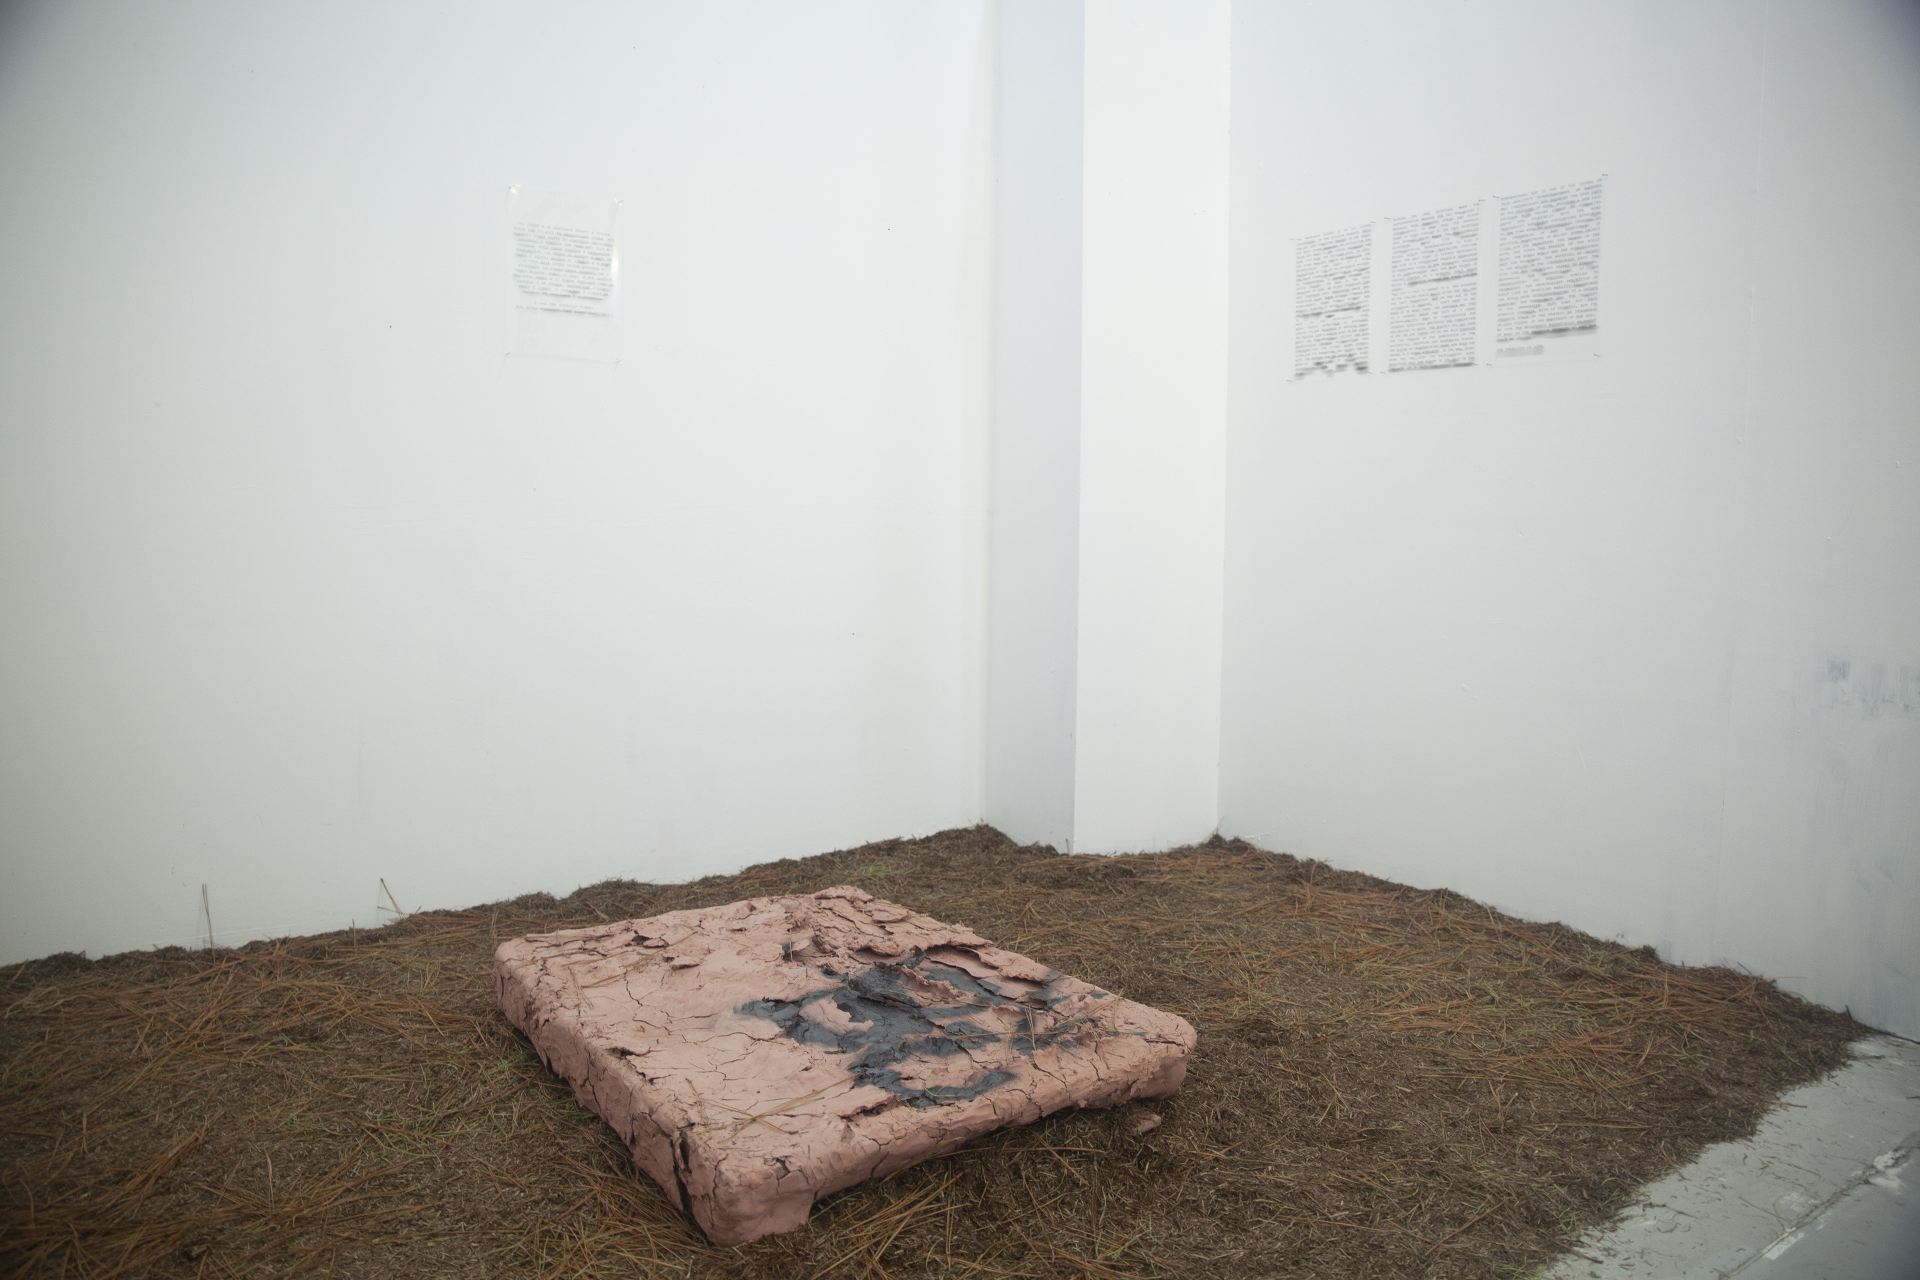 An image of a sculpture on a floor made of compressed straw and mud.